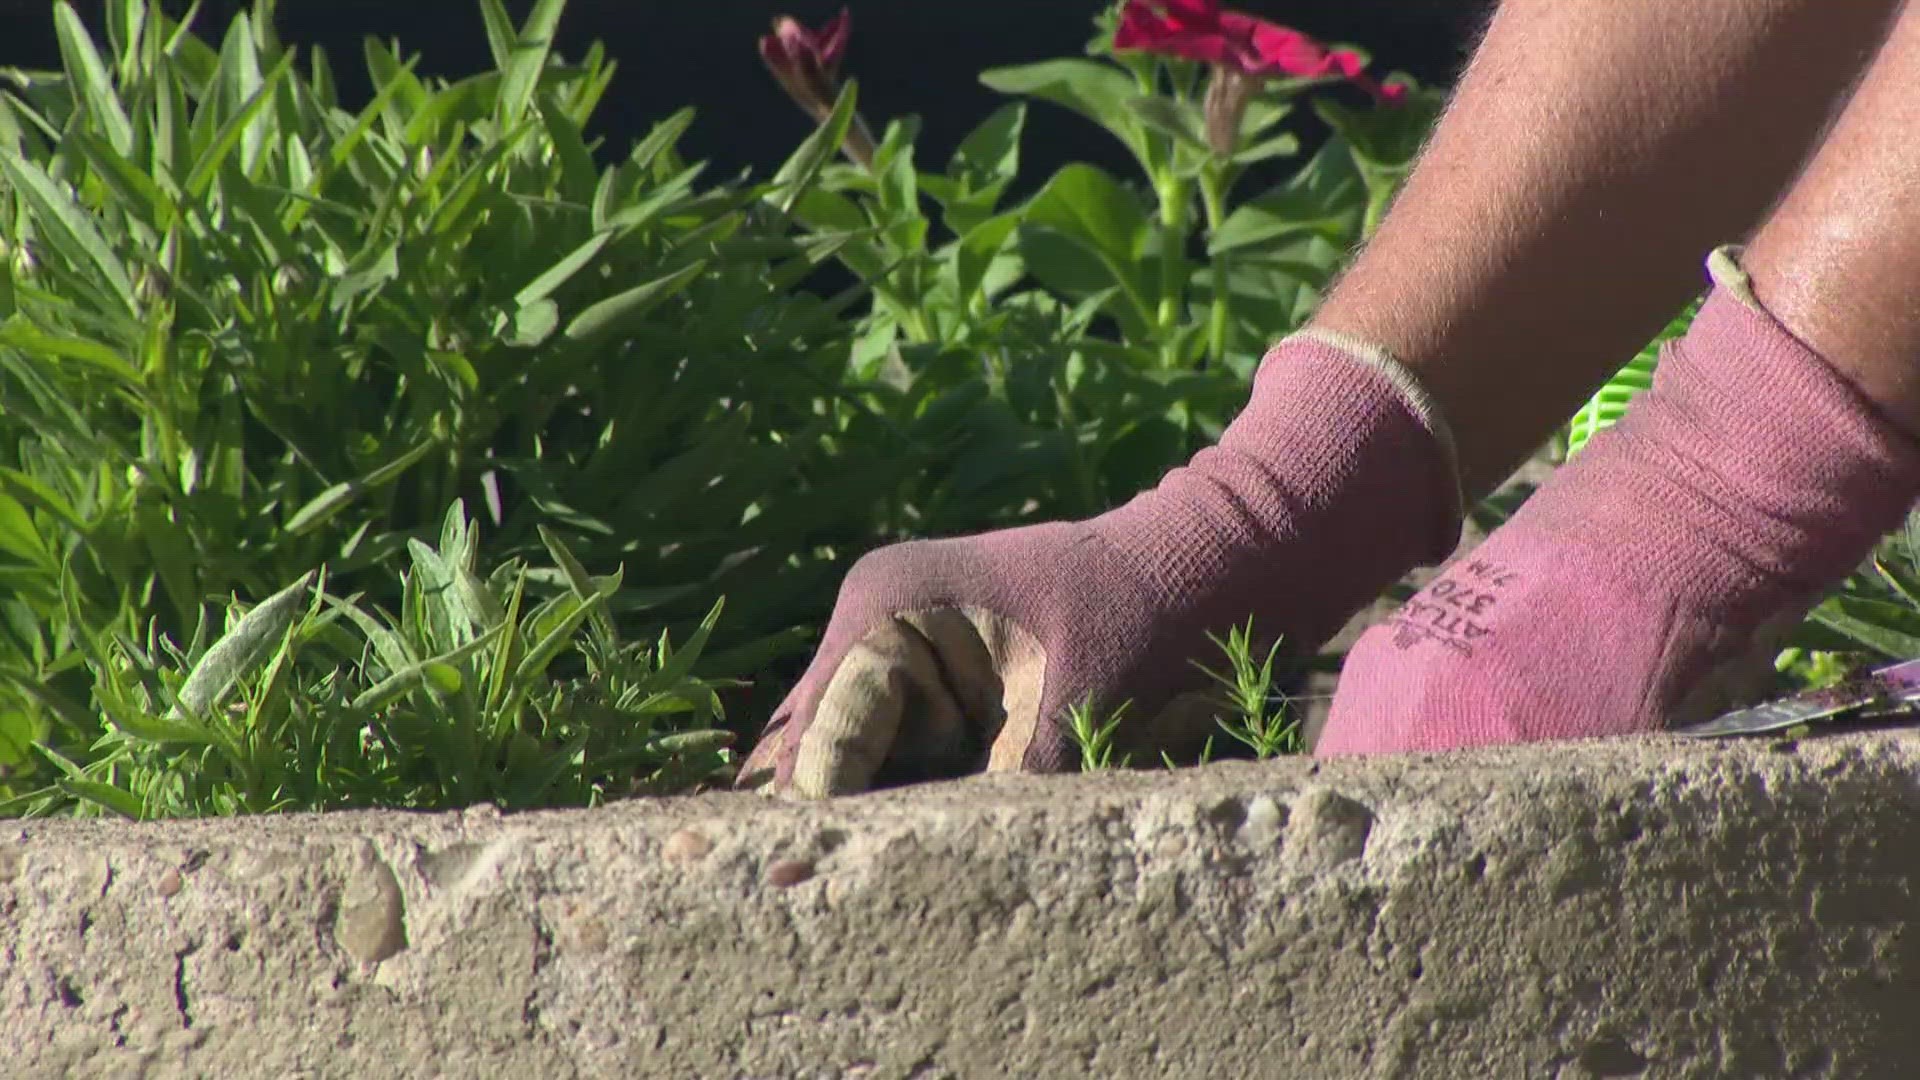 For years, South Broadway Businesses have paid for flowers to be planted on their street and for years those flowers have been getting stolen.